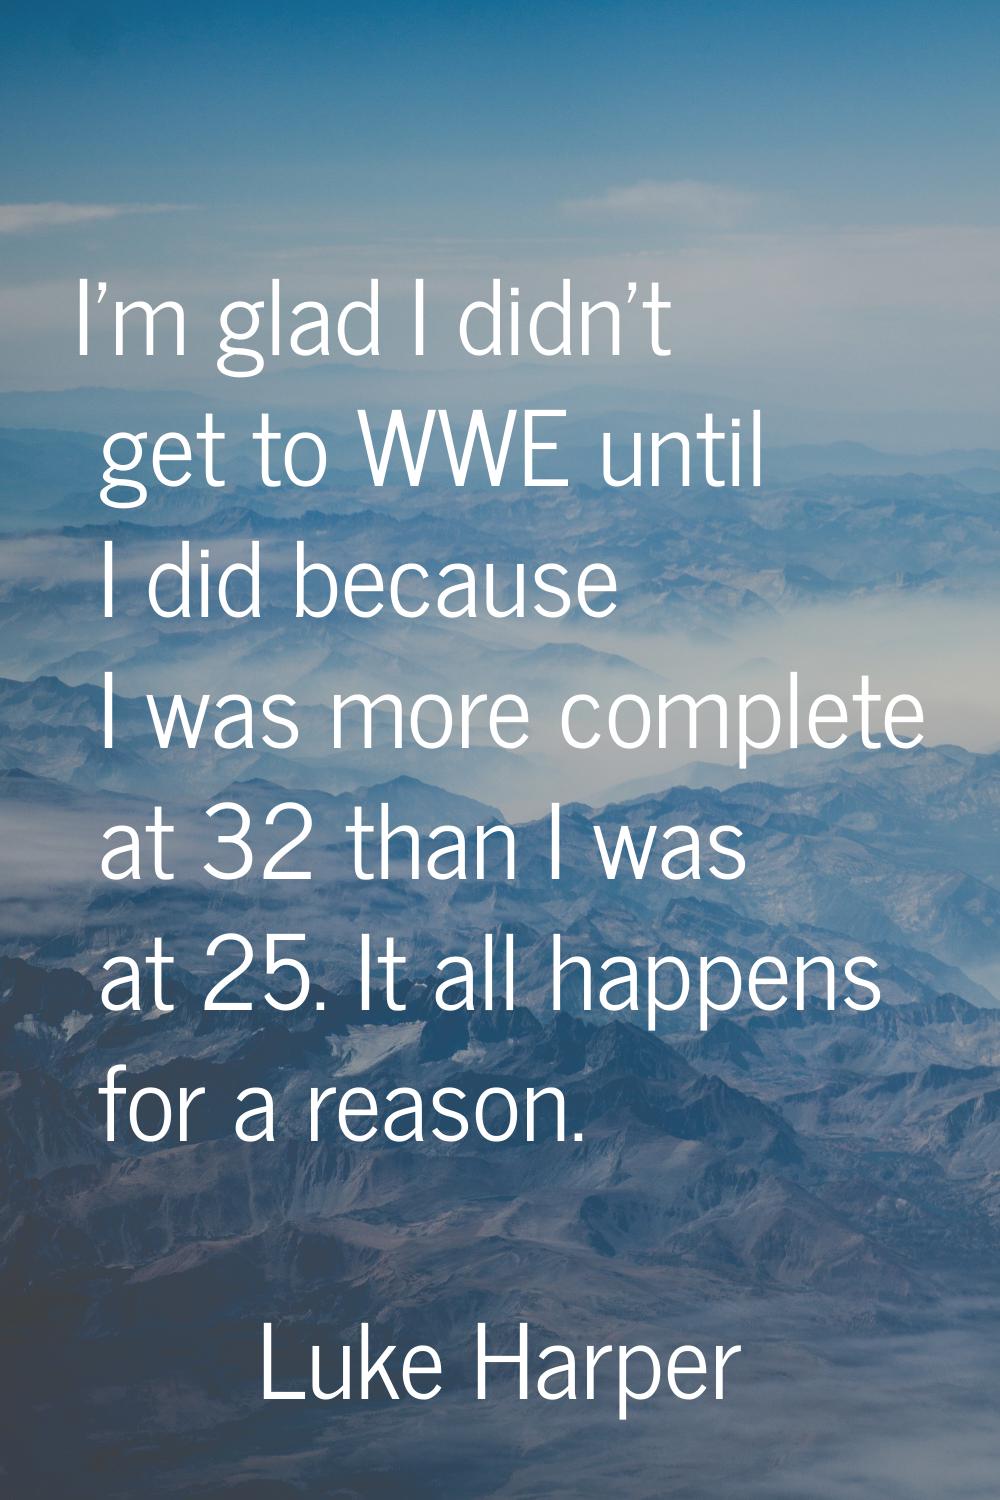 I'm glad I didn't get to WWE until I did because I was more complete at 32 than I was at 25. It all